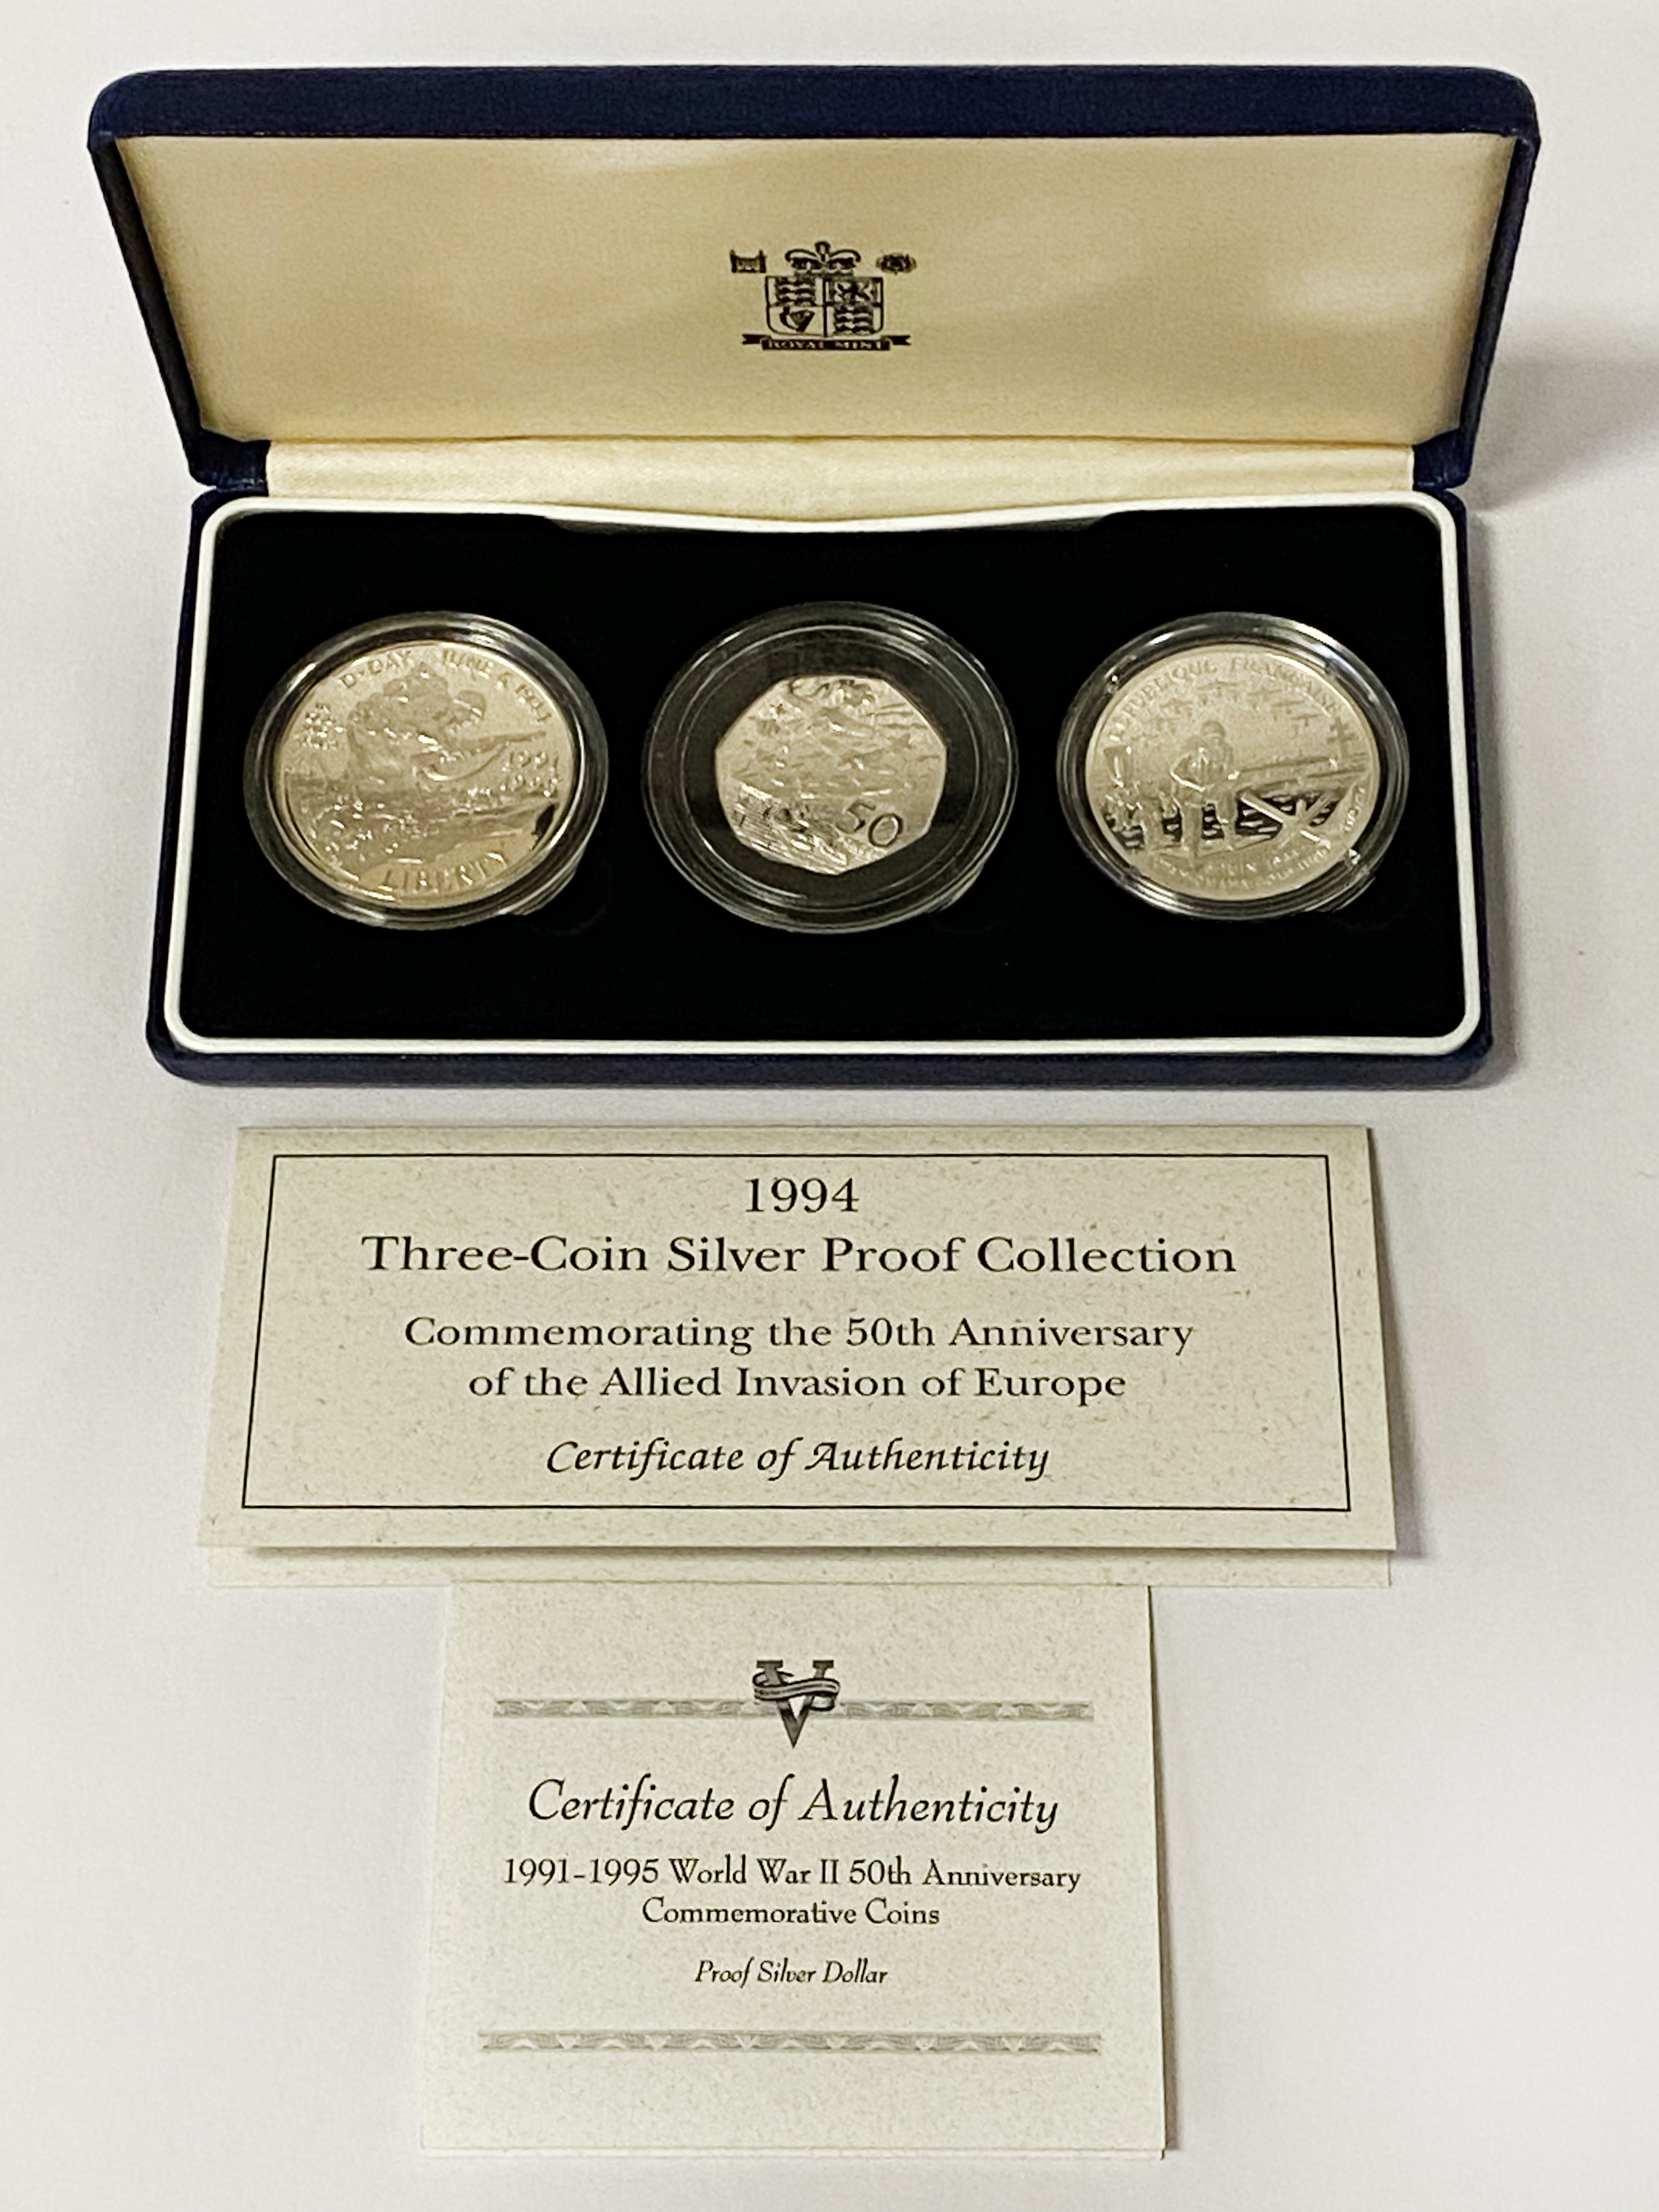 3 COIN SILVER PROOF COLLECTION & CERTIFICATE 1994